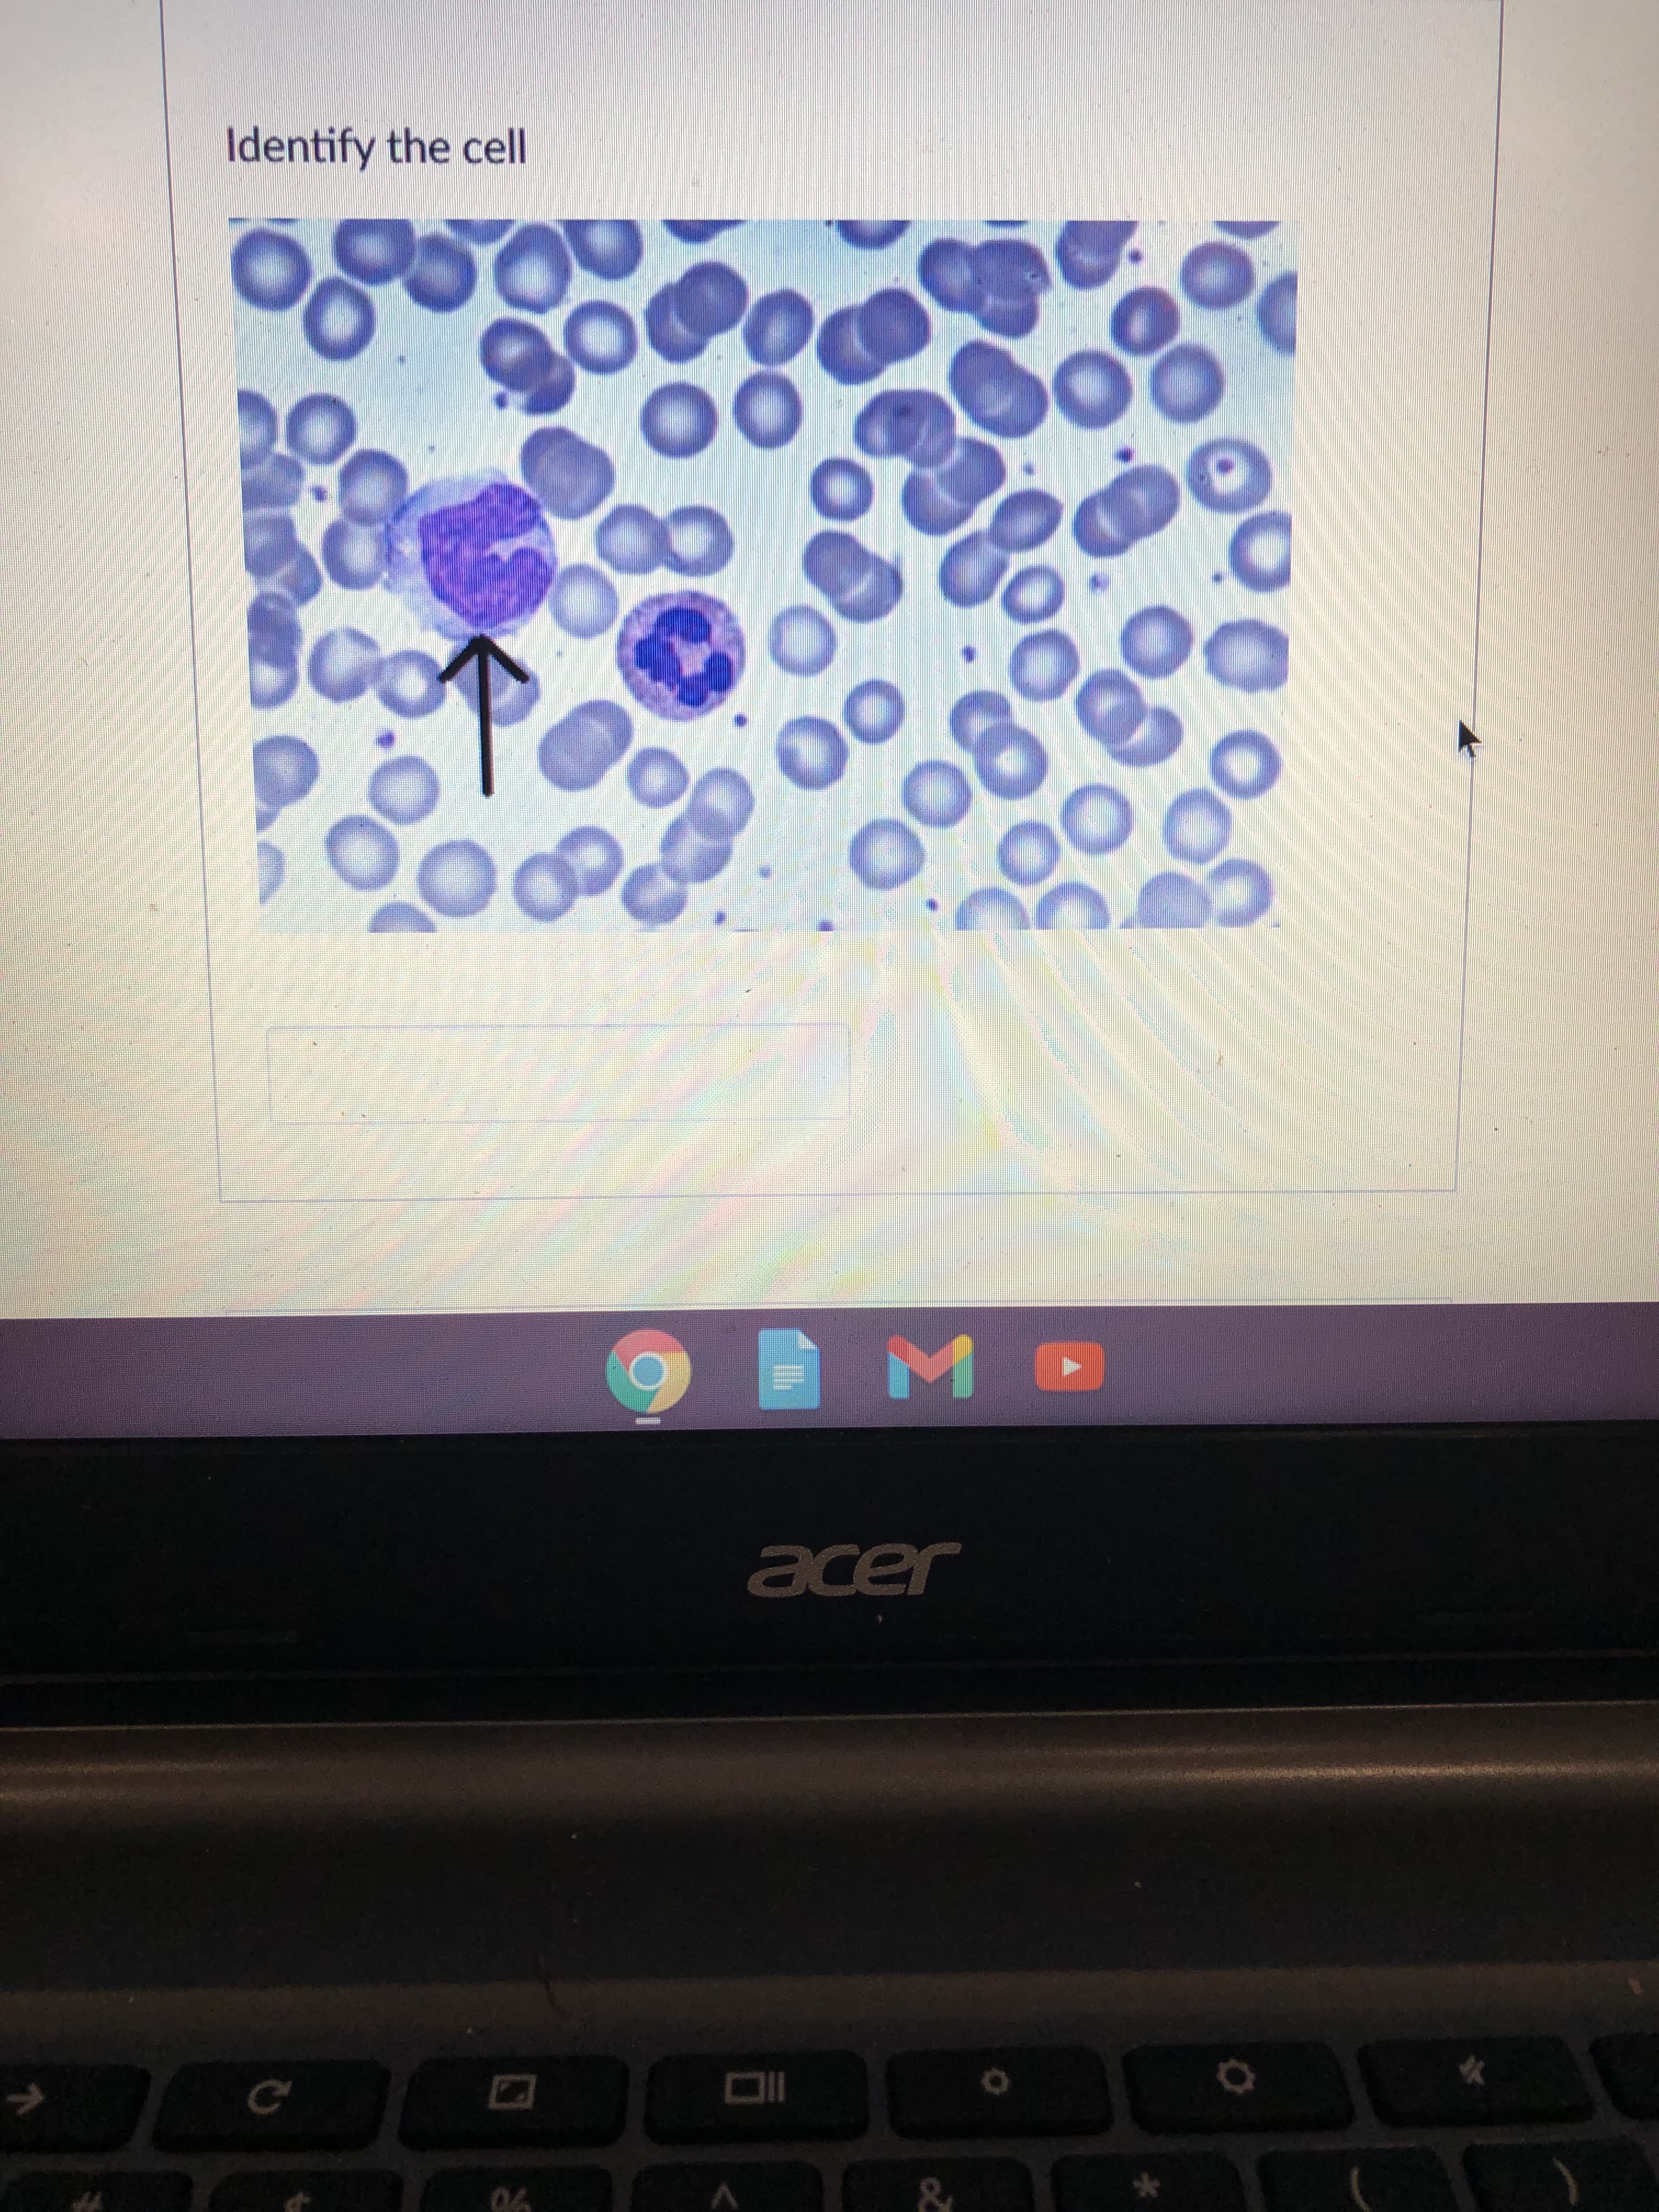 800
Identify the cell
IID
